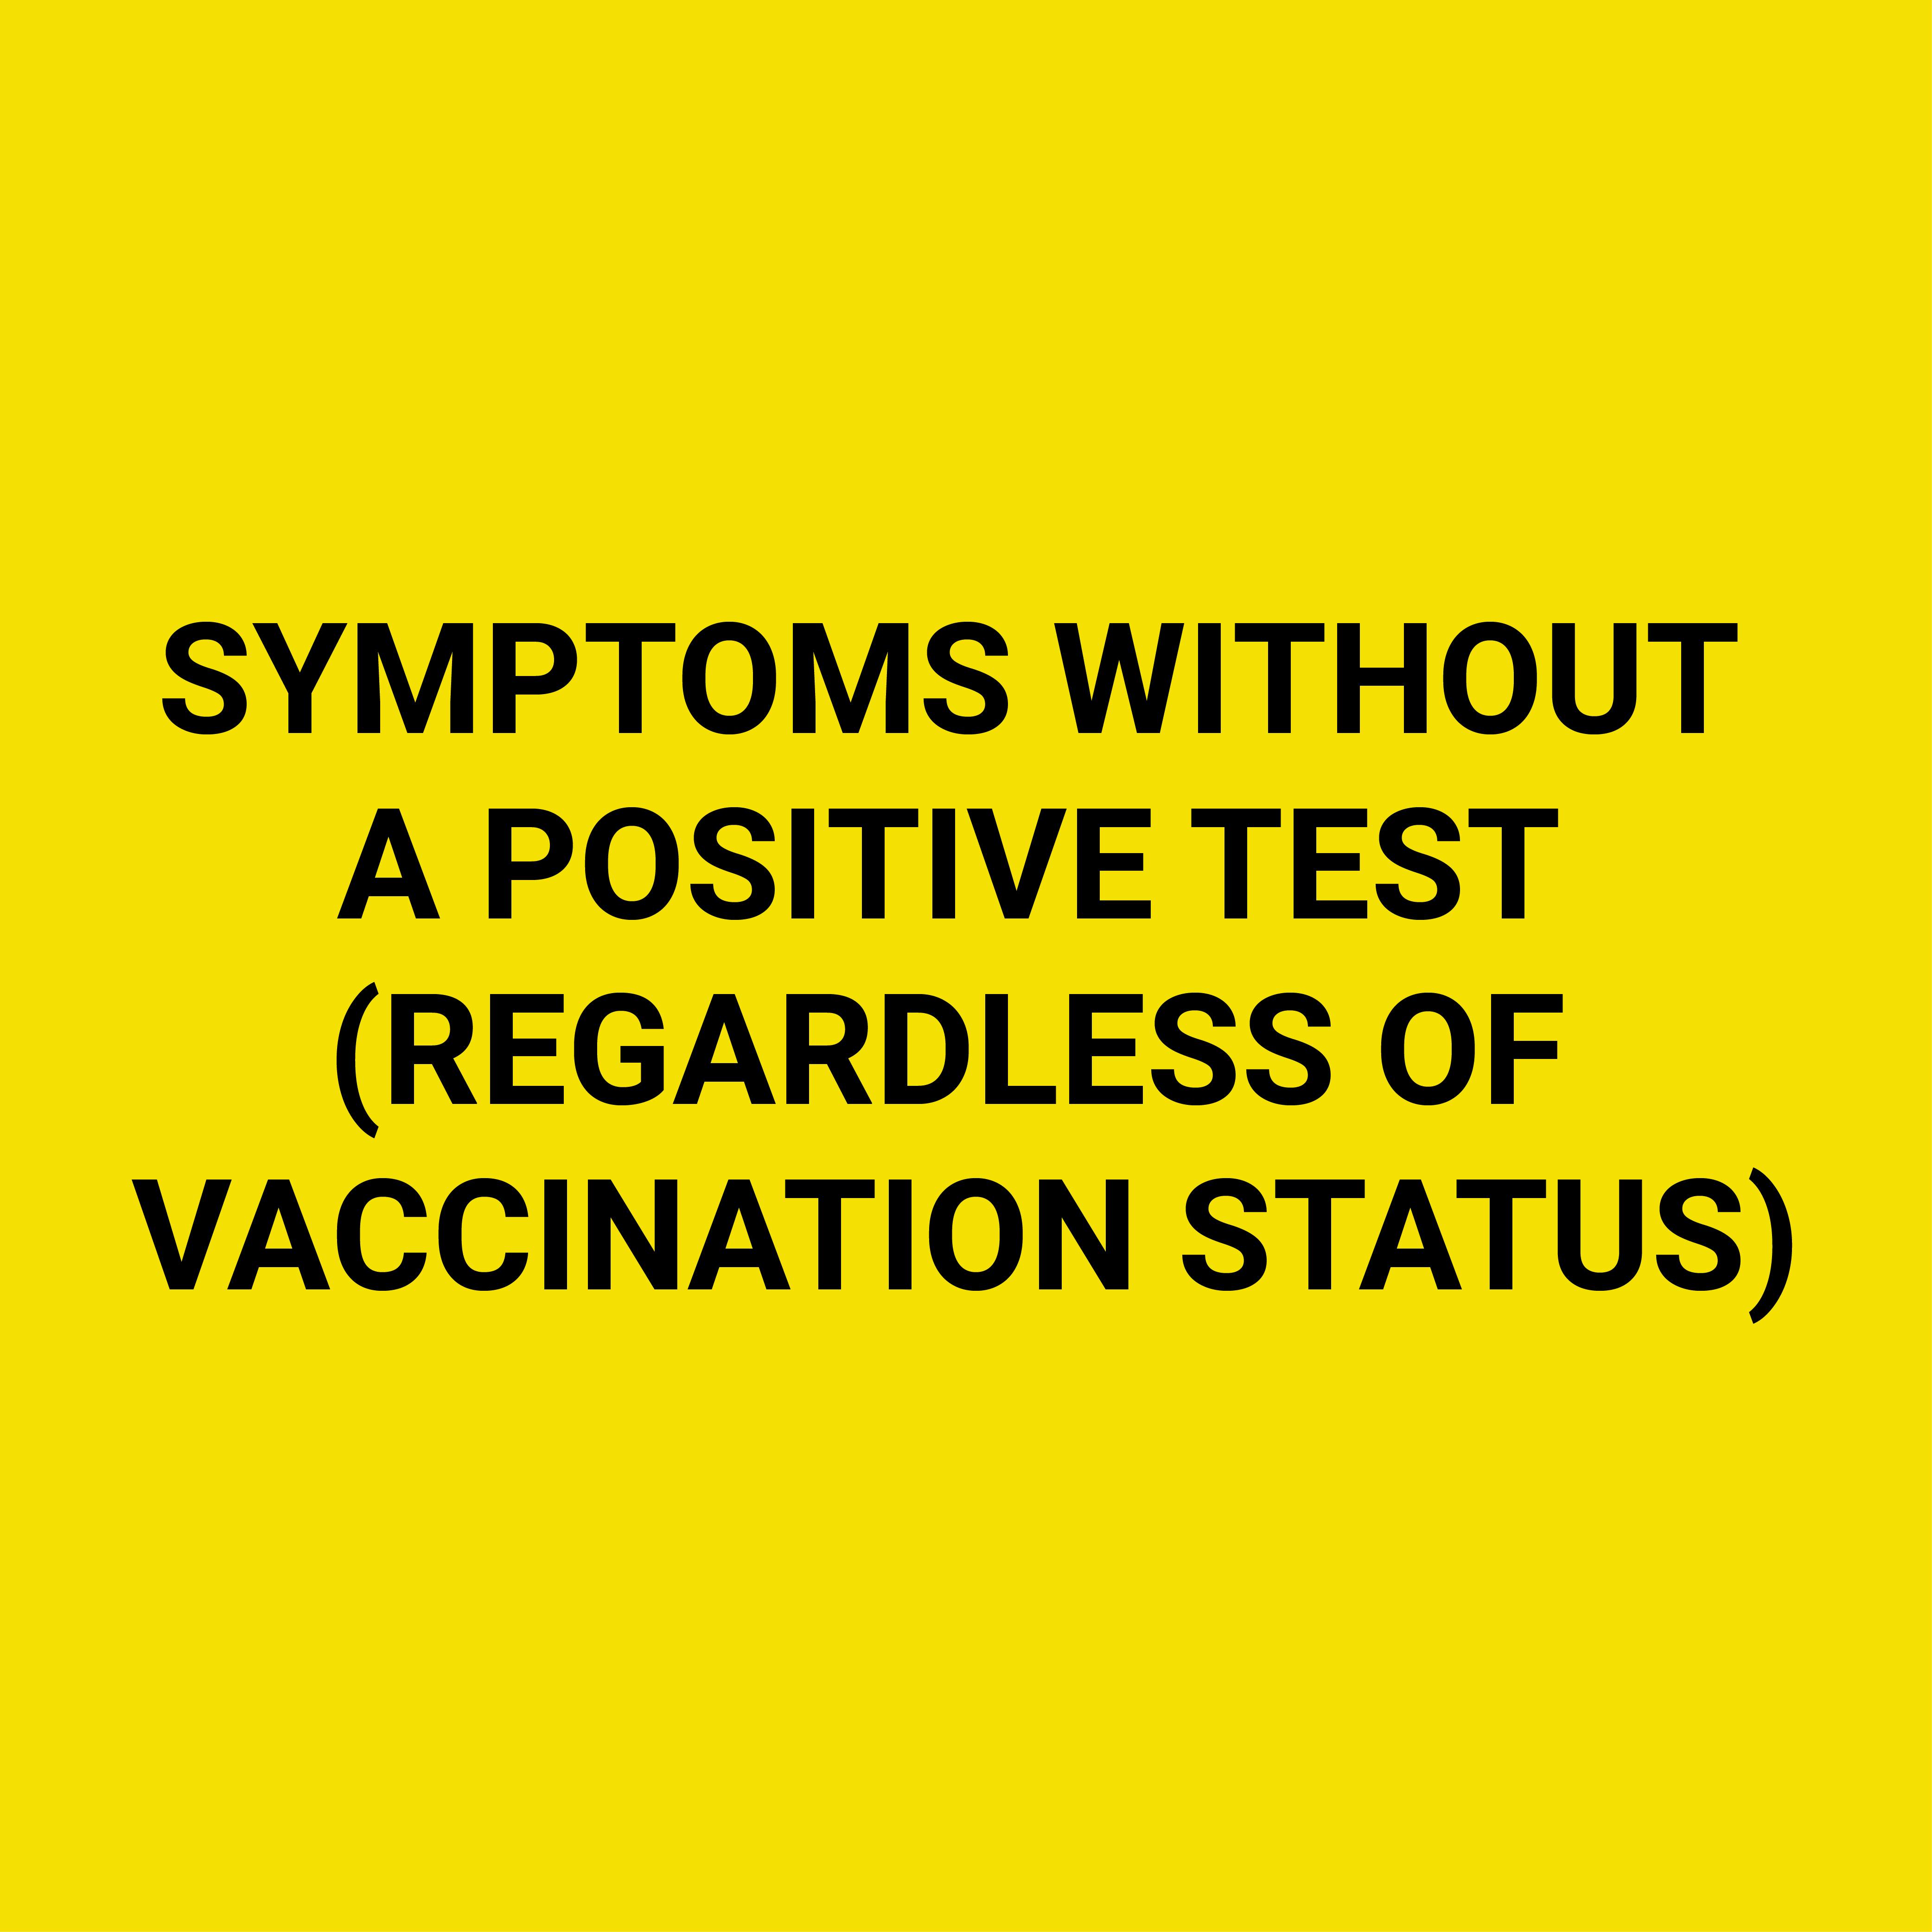 SYMPTOMS WITHOUT A POSITIVE TEST (REGARDLESS OF VACCINATION STATUS)